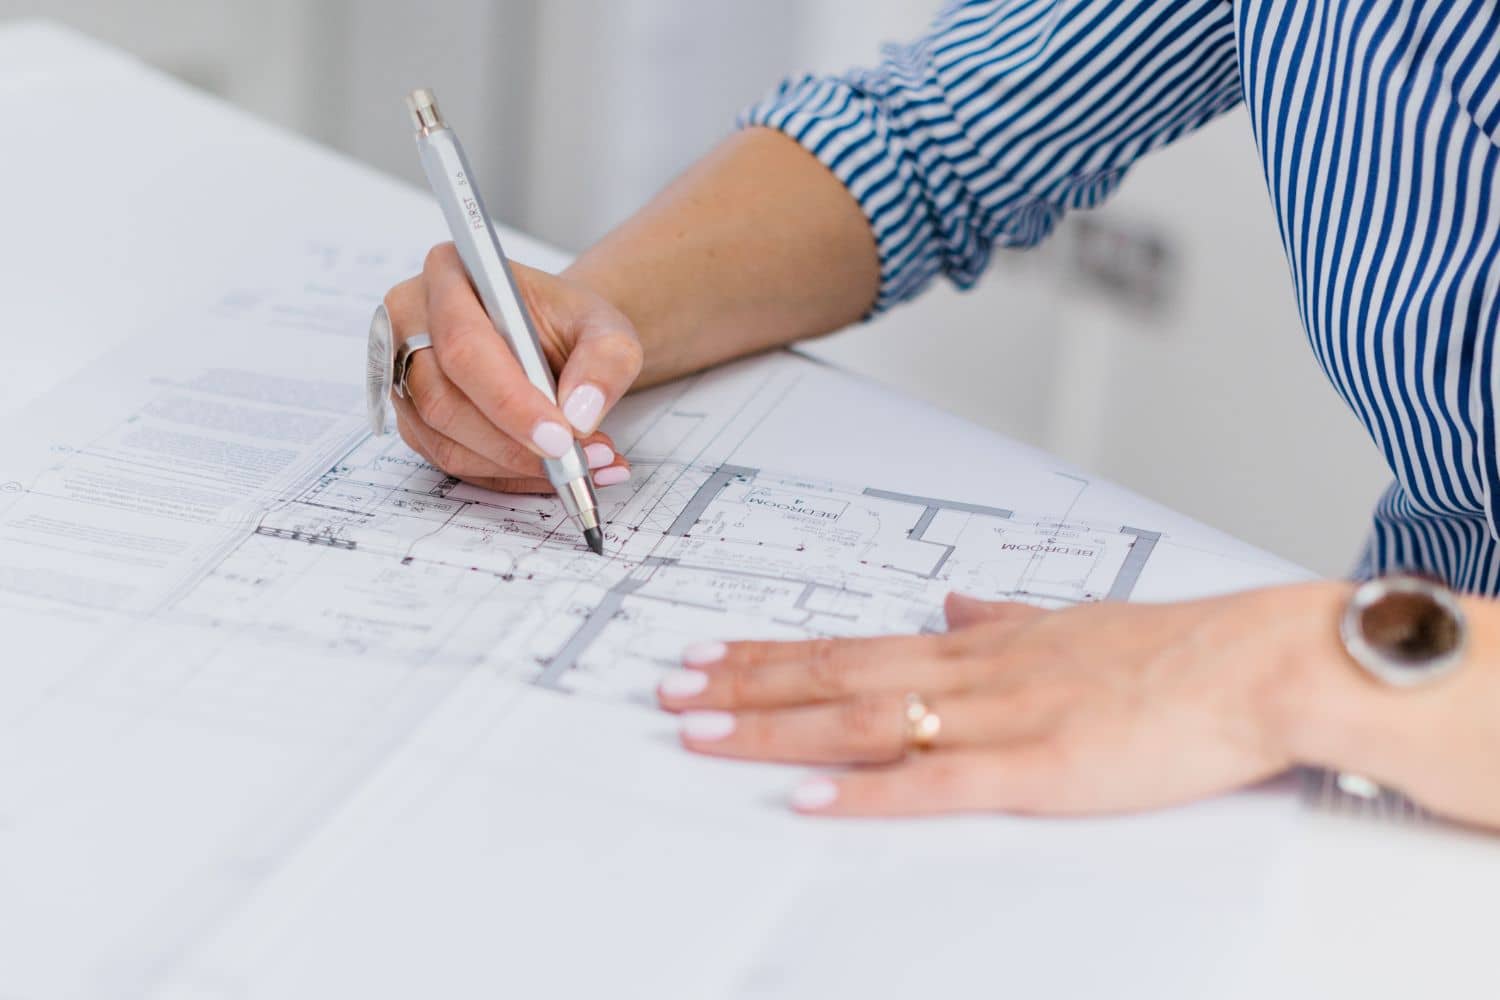 What's The Difference Between An Interior Architect And An Interior Designer?